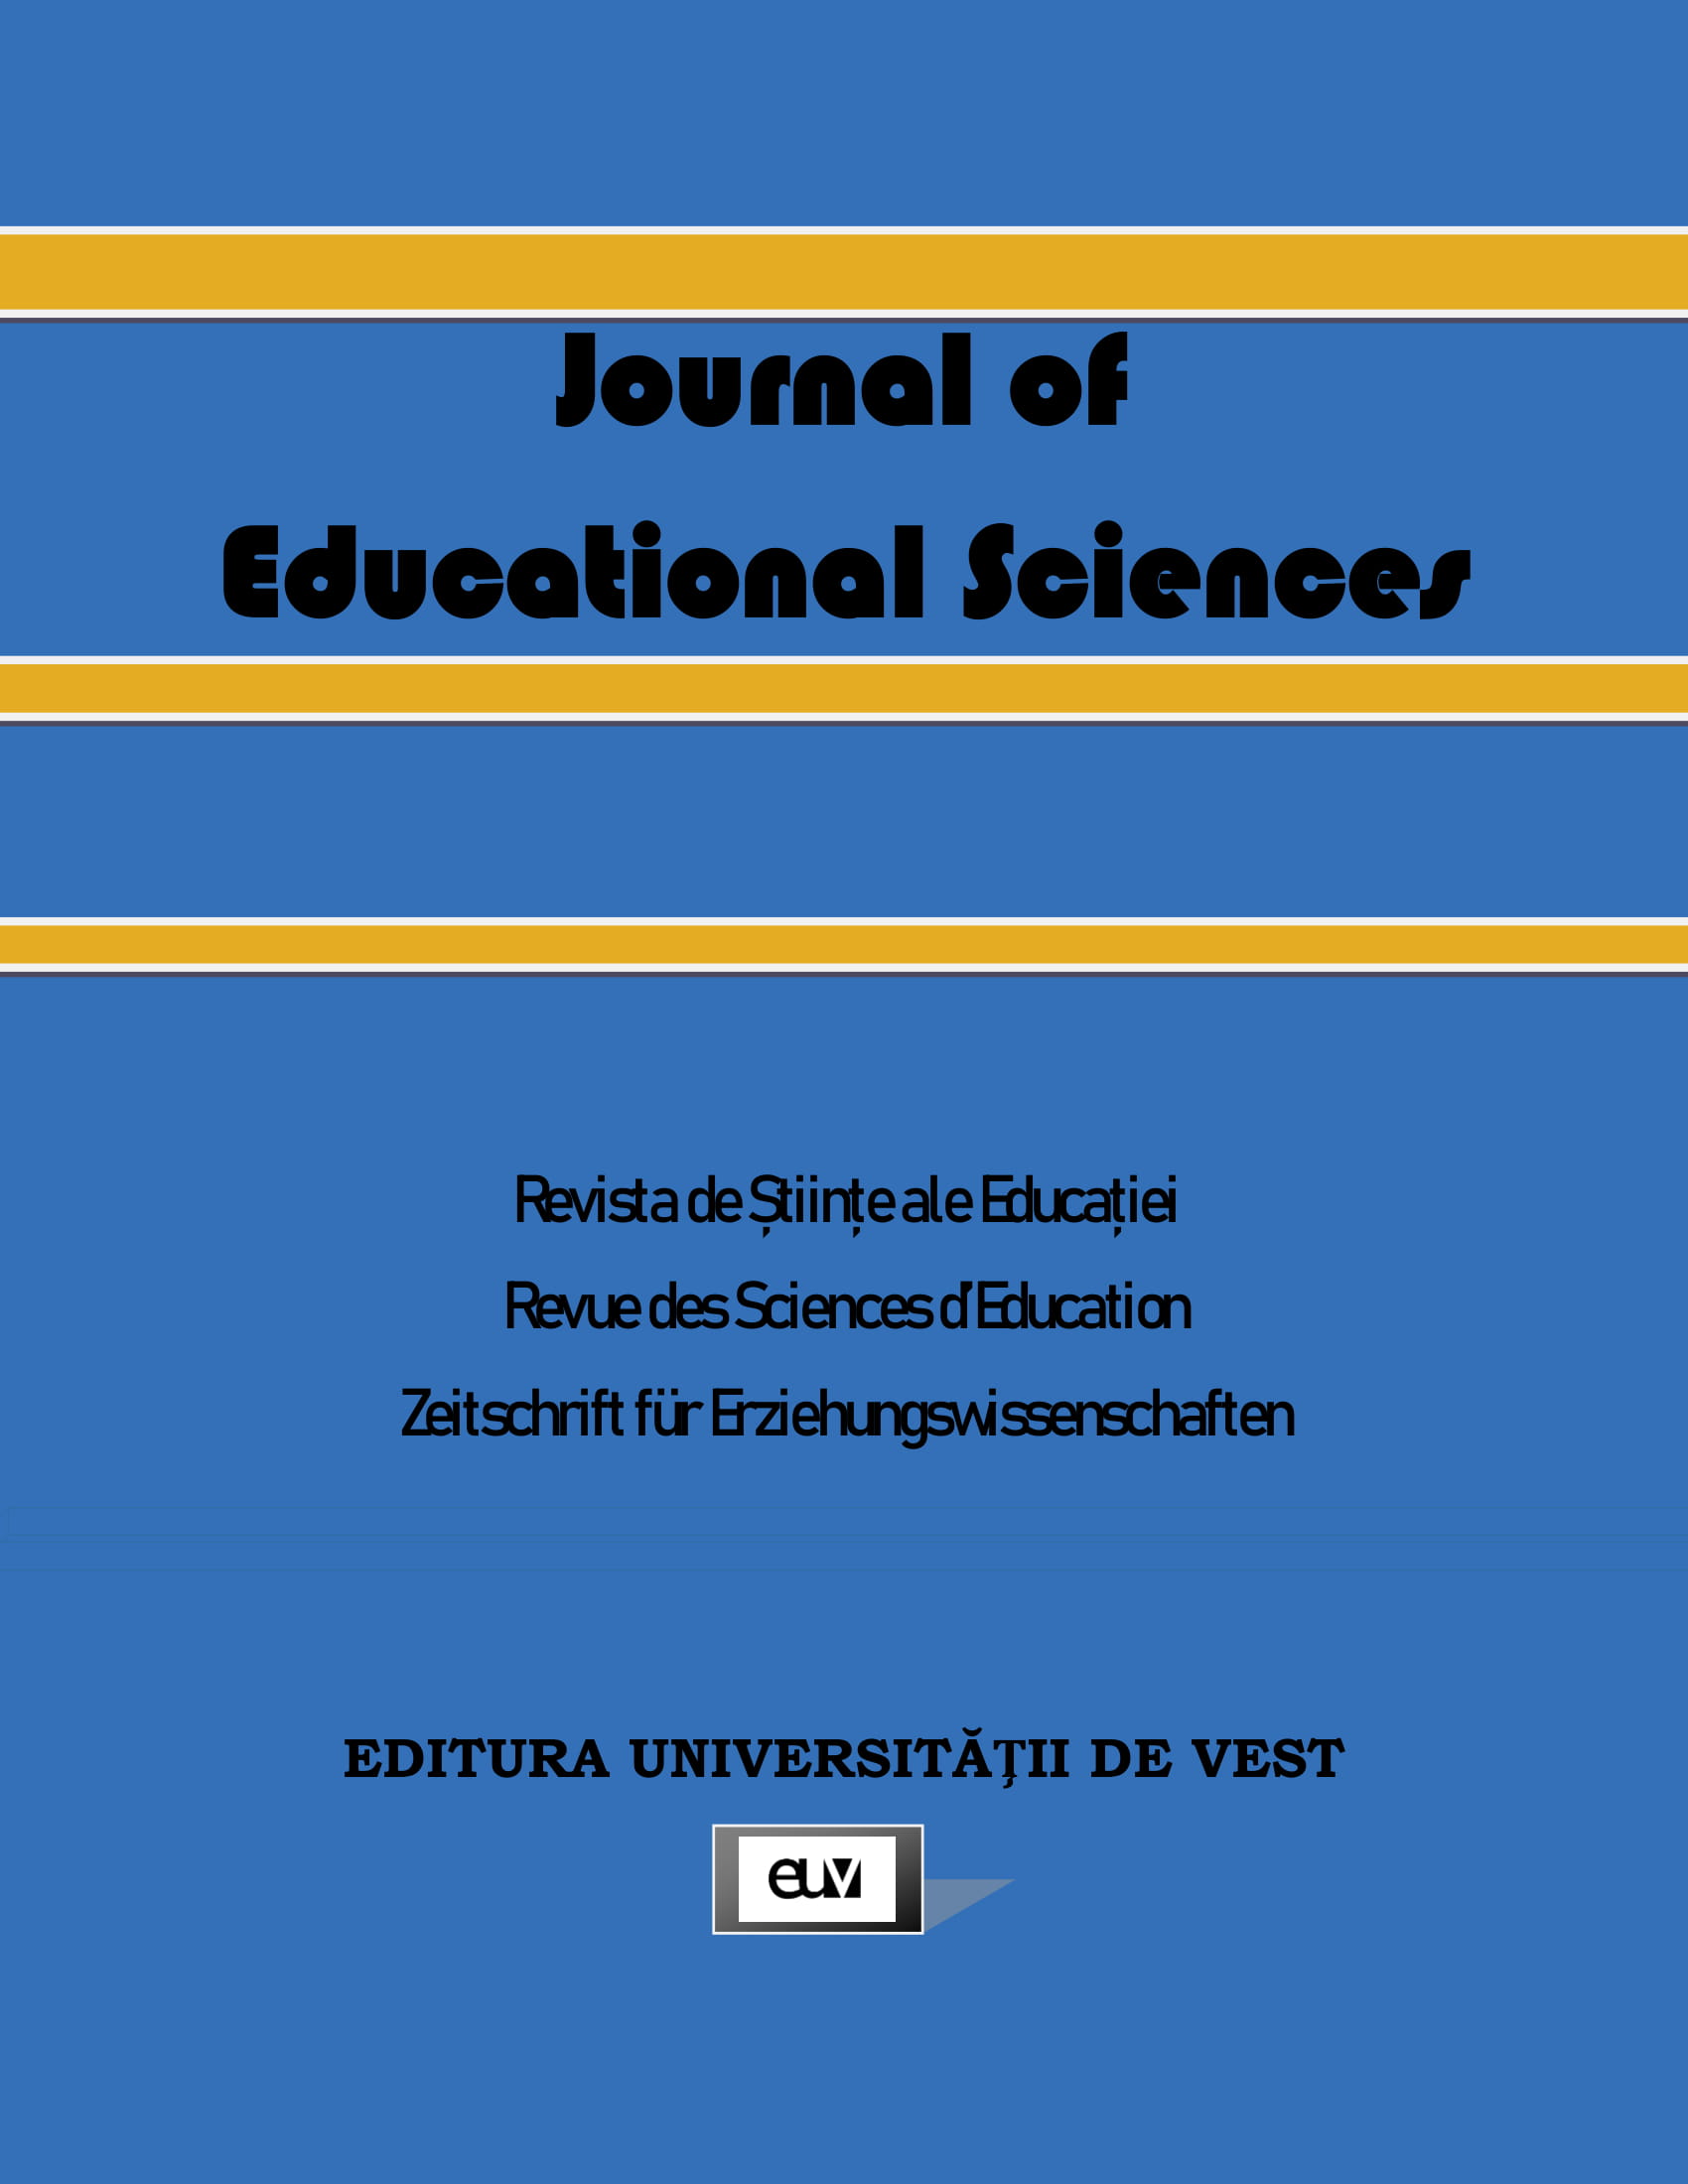 Self-concept, interpersonal processes, exploratory and health risk
behaviors in adolescents – a study regarding student engagement
with school